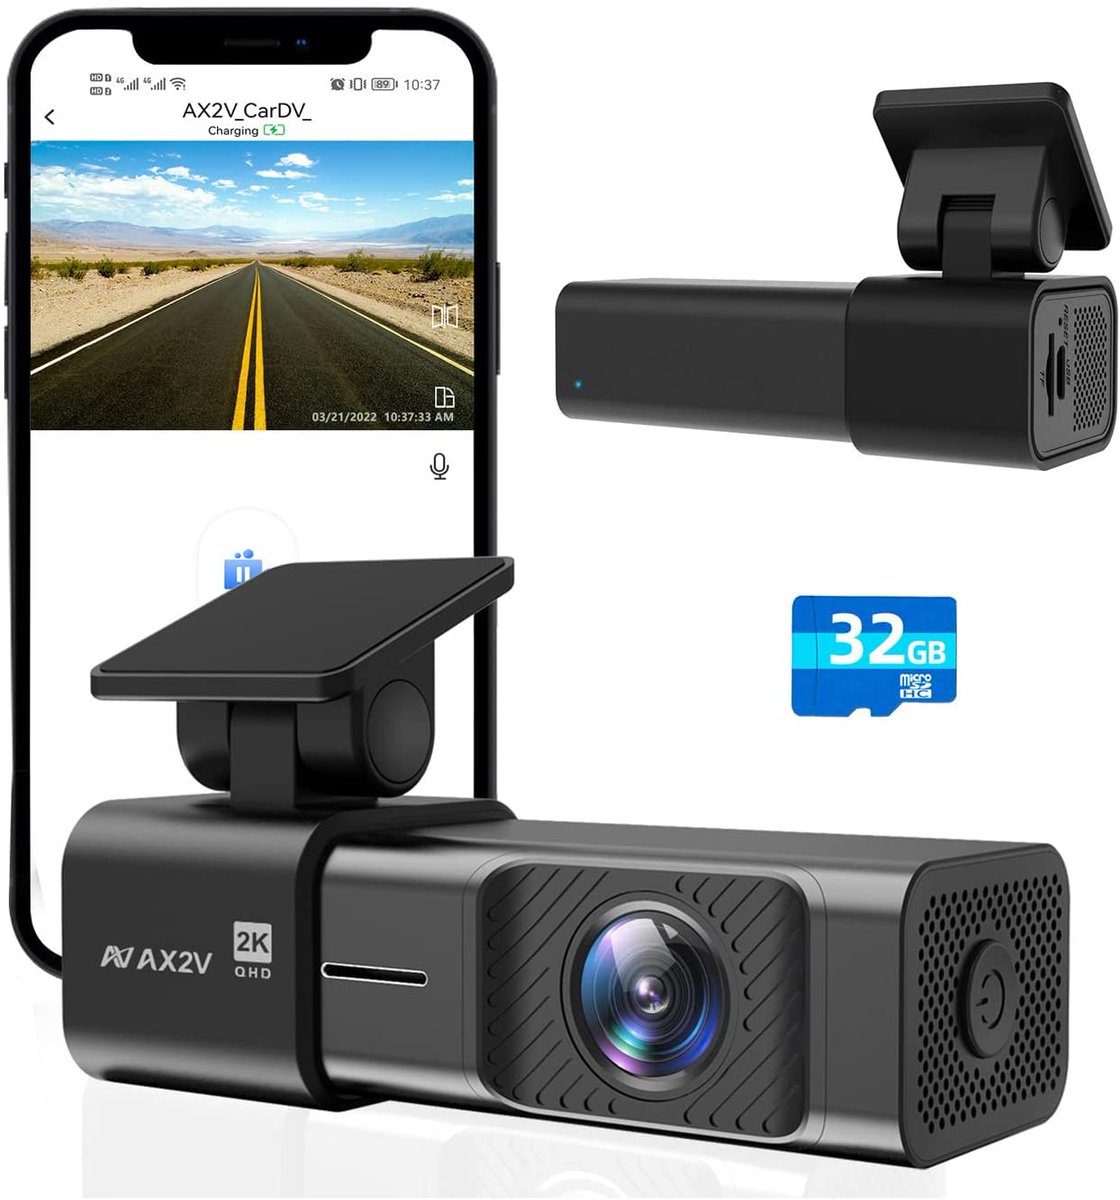 Dash Cam for $29.99!
-- Save 40% with promo code 40I56P3X  
https://t.co/wo3Lsmr4eK

5lb Optimum Nutrition Gold Standard 100% Whey Double Chocolate Protein Powder for as low as $50.99! (Retail $85)
-- Coupon on page PLUS save $8.50 at checkout!
https://t.co/EpohJybcqc https://t.co/I1Aa77DoP4